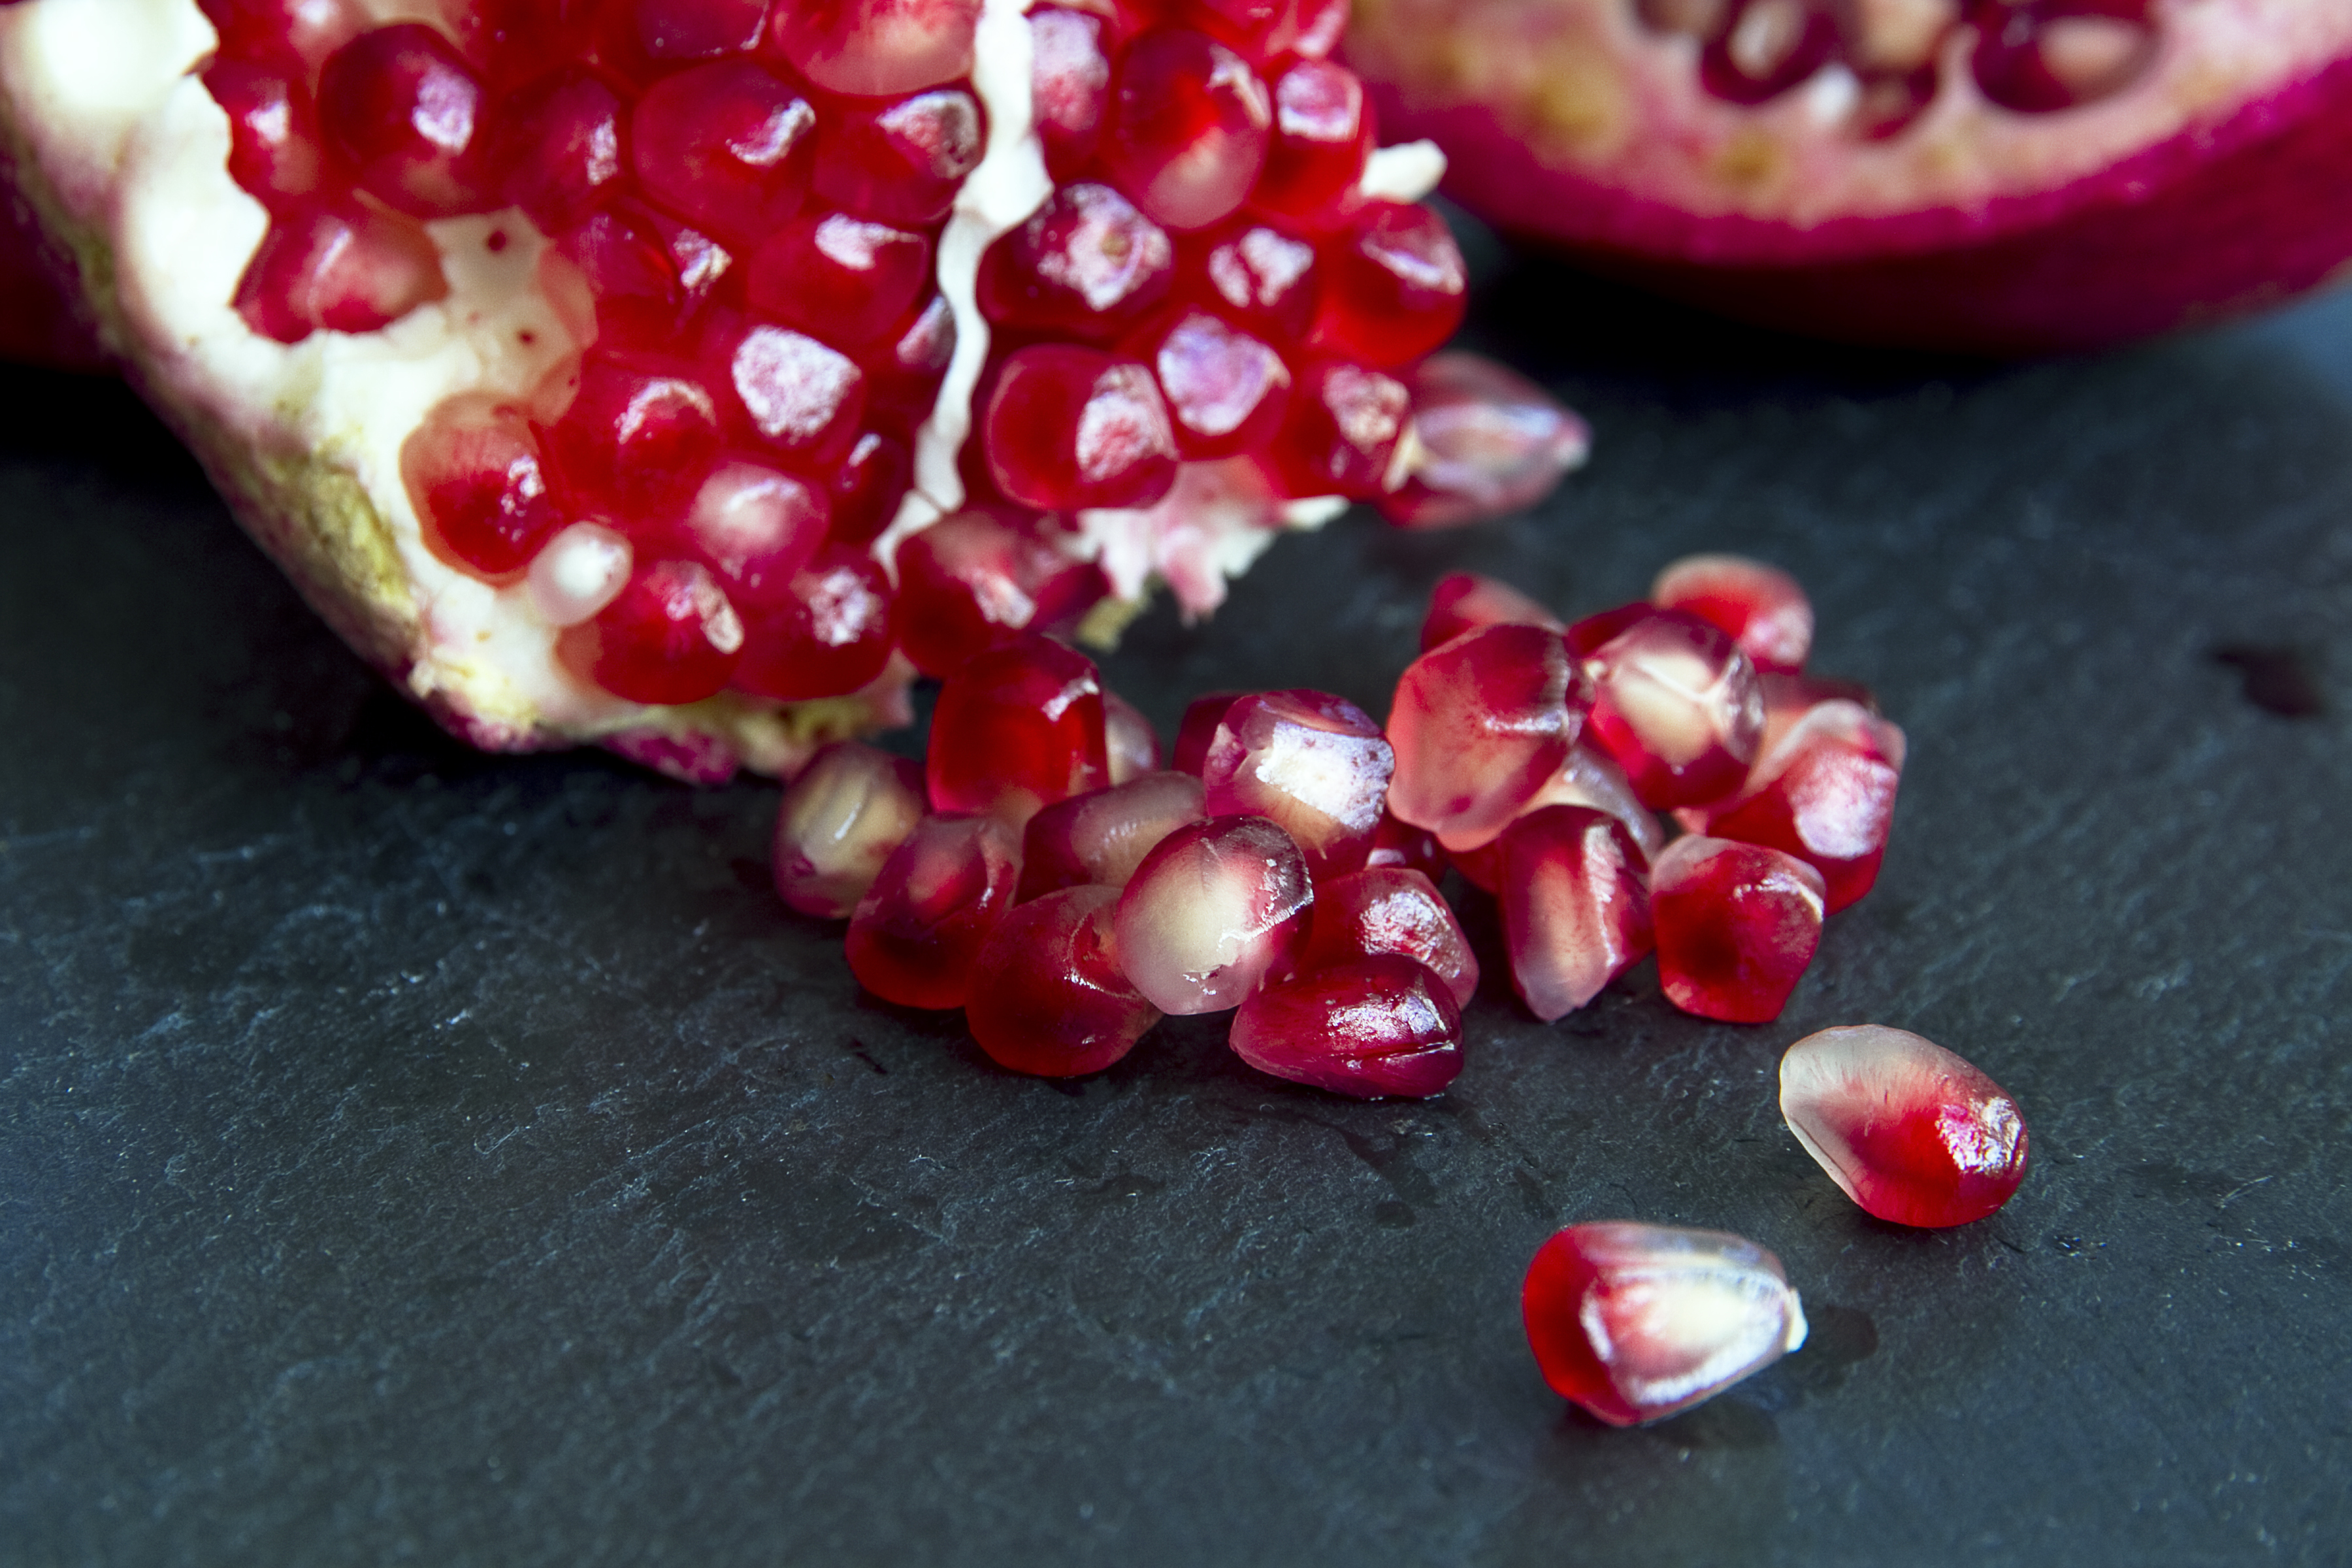 “Rich in antioxidants and potassium, pomegranate seeds and juice have a sour-sweet flavor that helps perk up meals during the winter months,  says O'Brady.